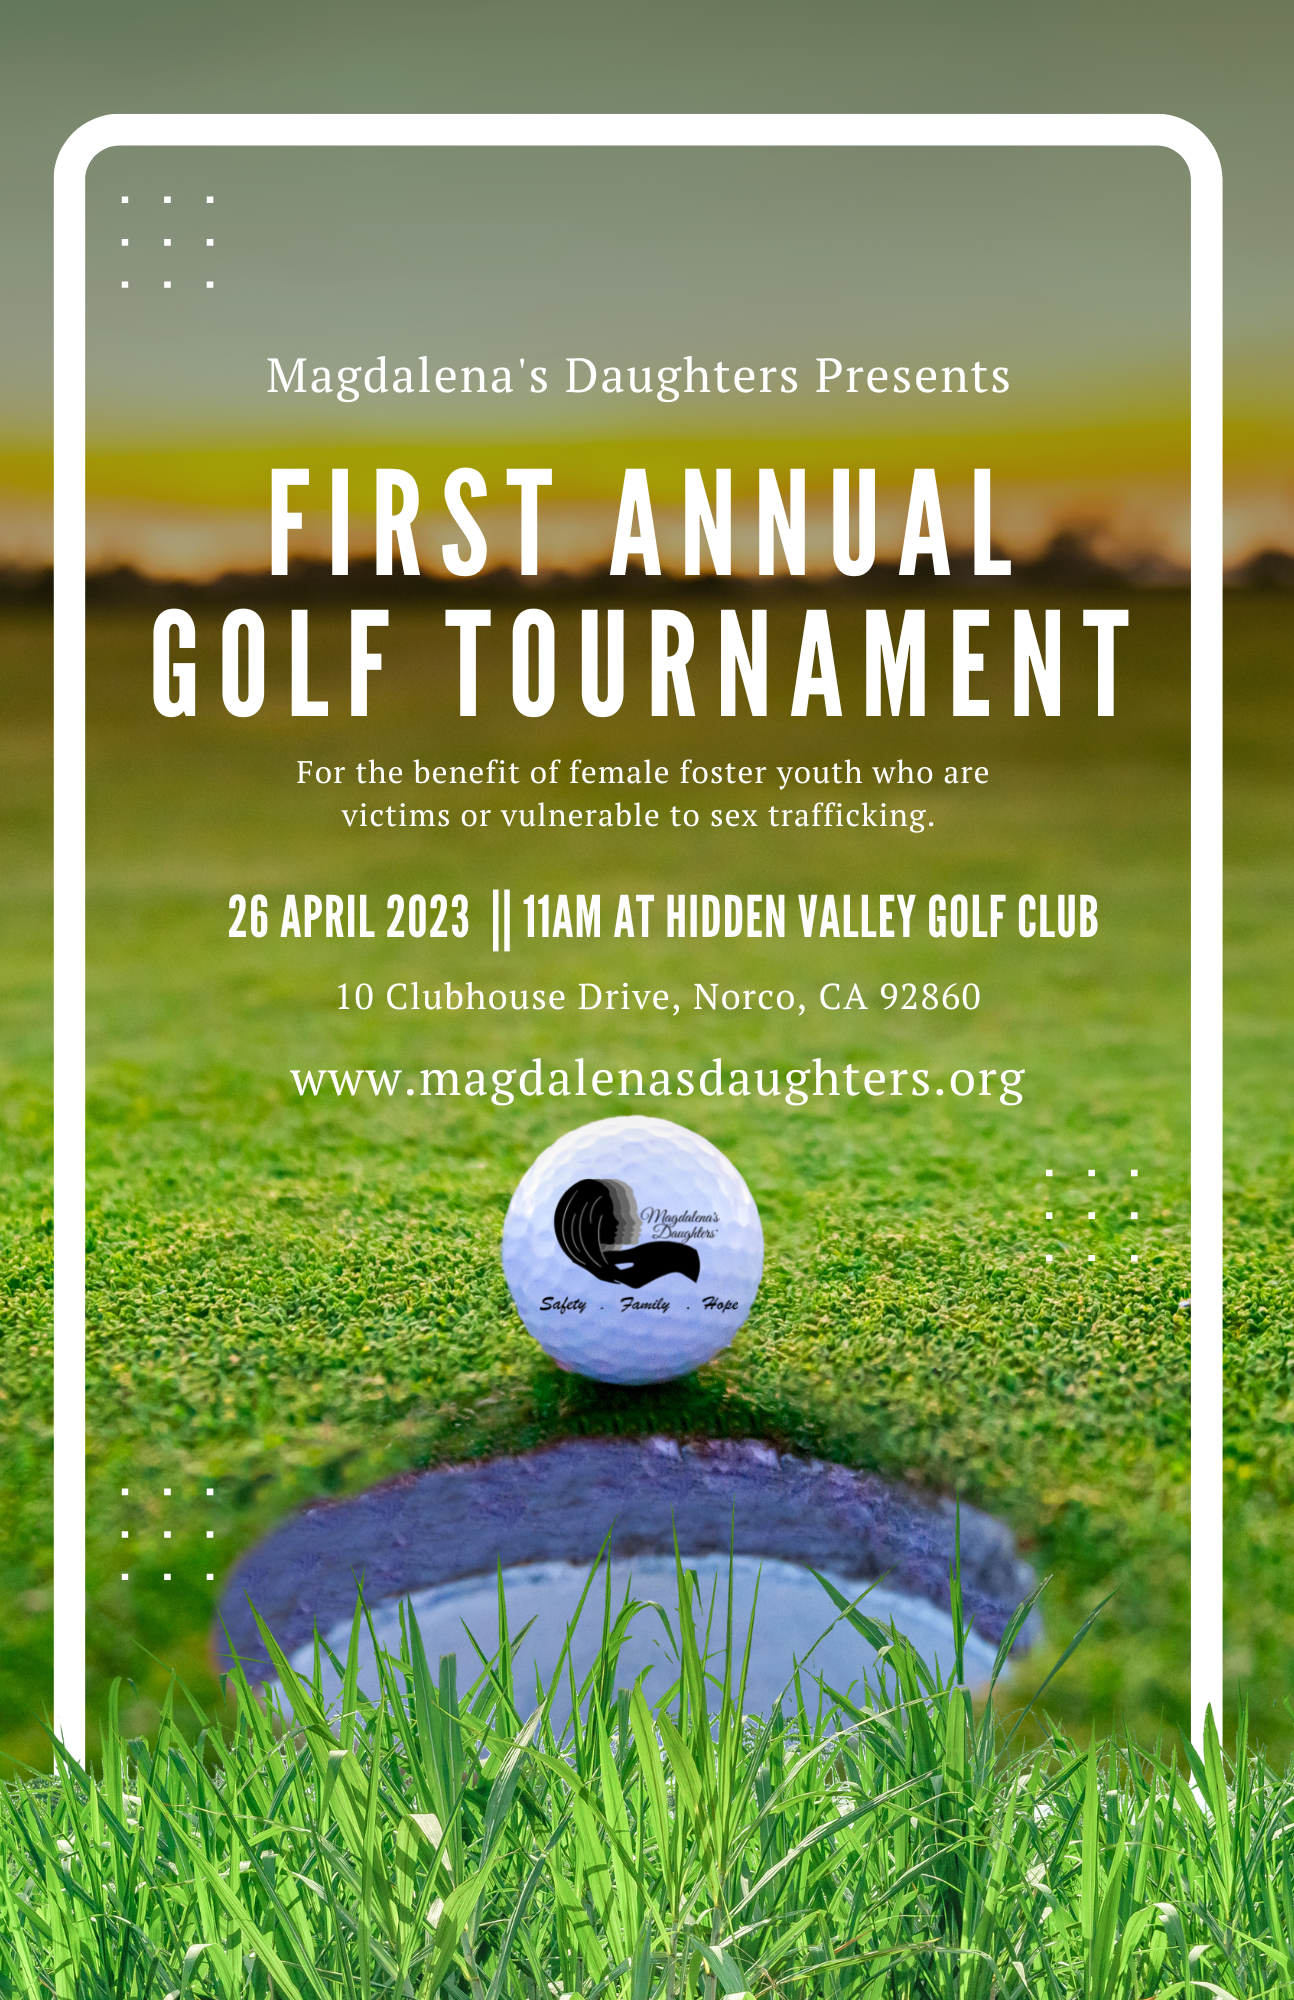 Magdalena’s Daughters 1st Annual Golf Tournament